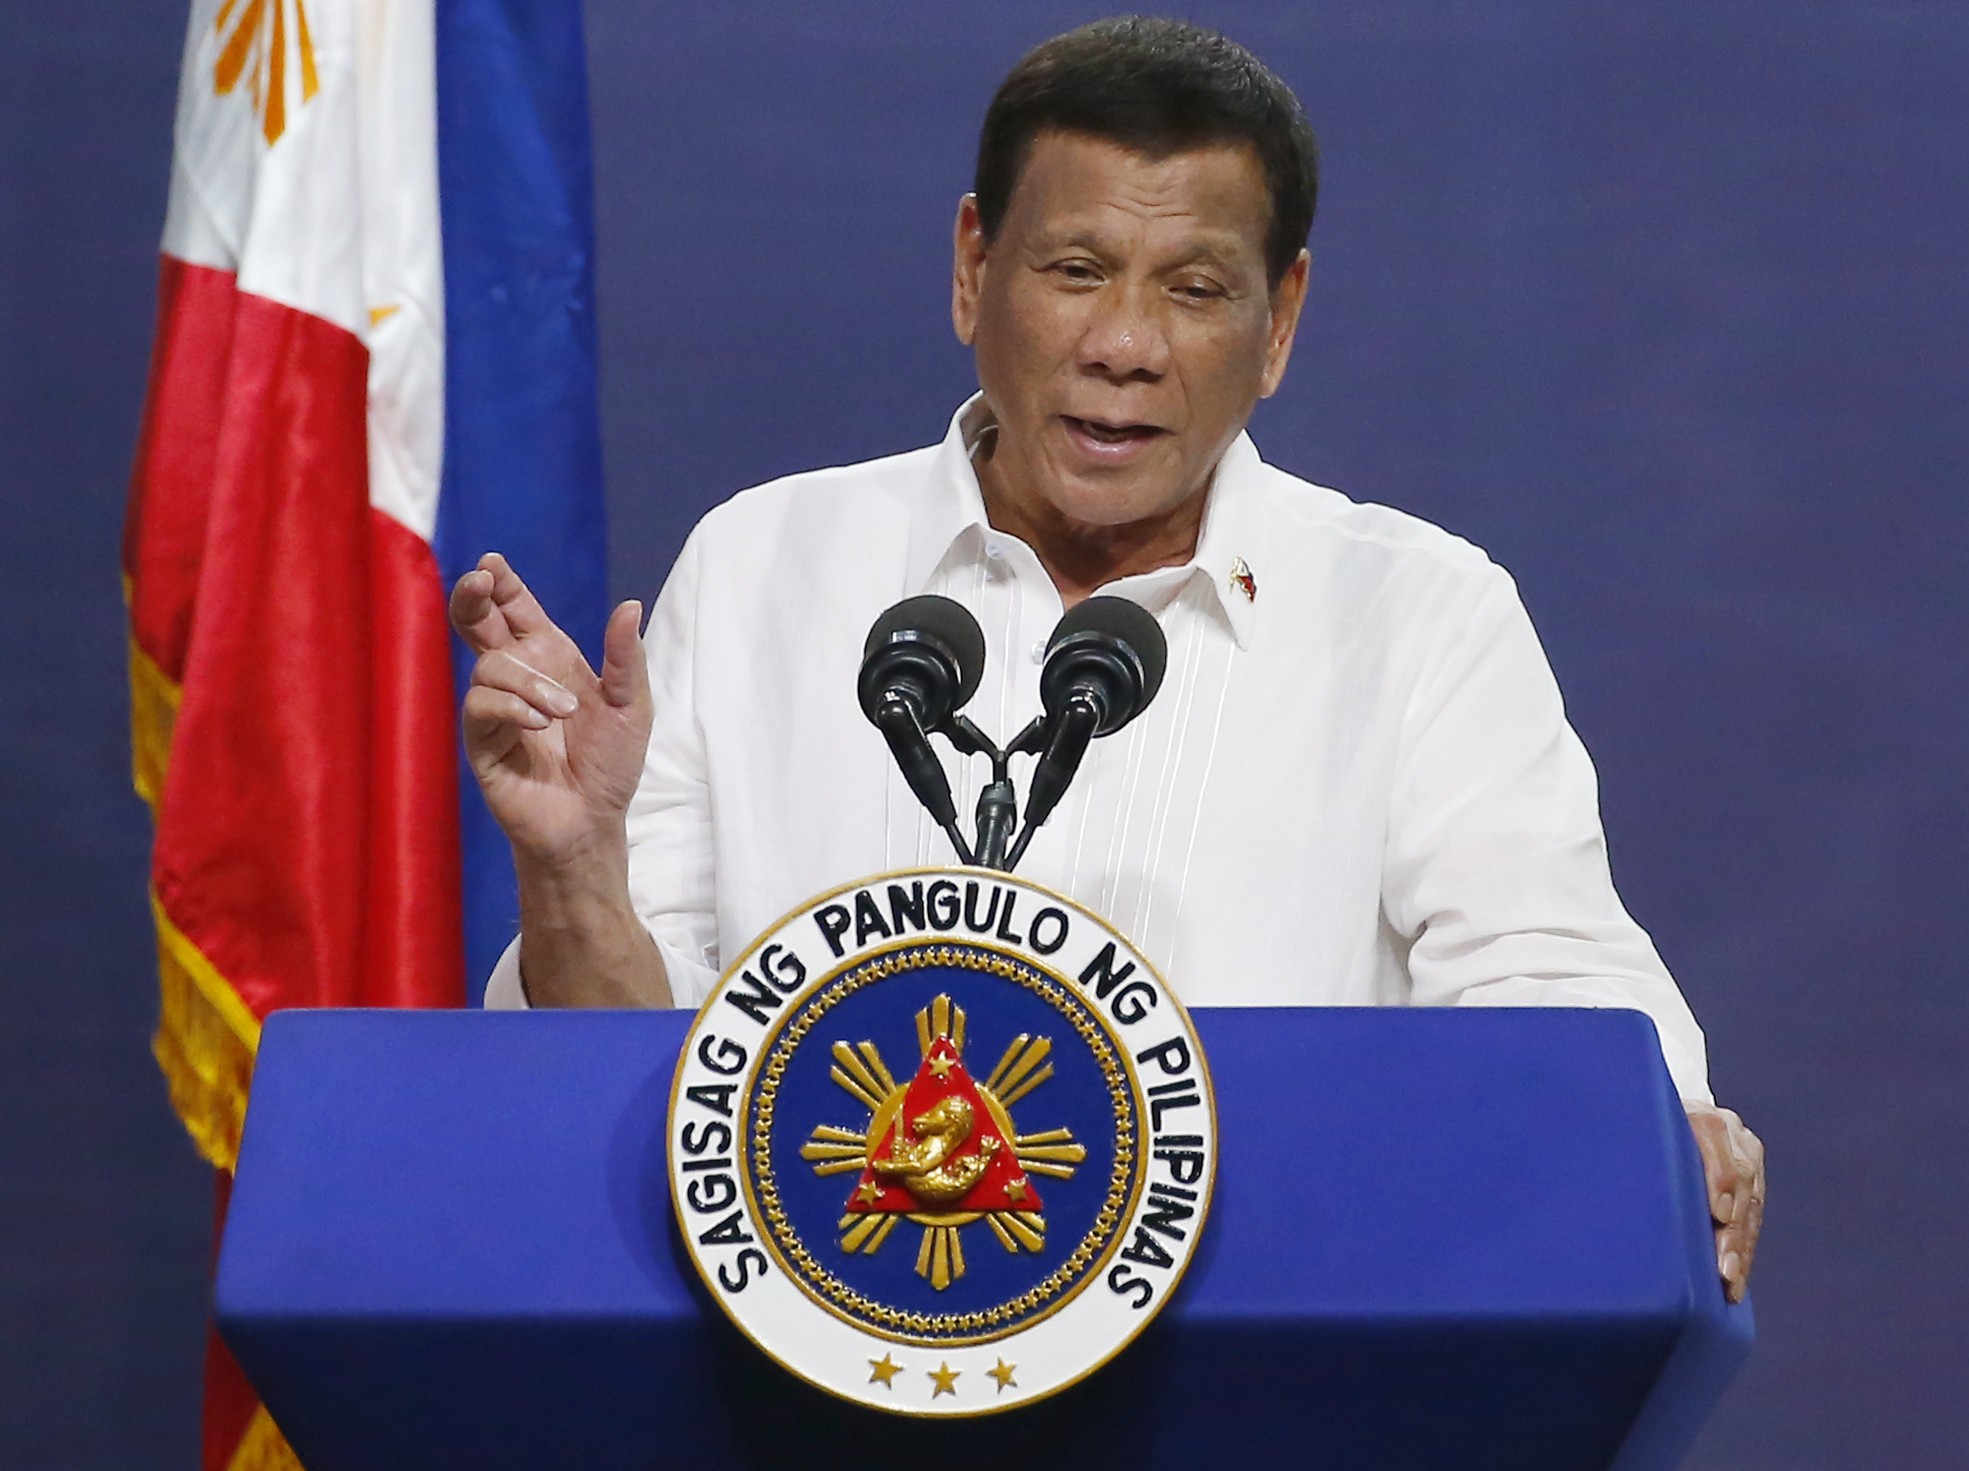 Philippine President Rodrigo Duterte is facing two murder complaints before the International Criminal Court in The Hague over the deaths of thousands of people in his war on drugs. Photo: AP